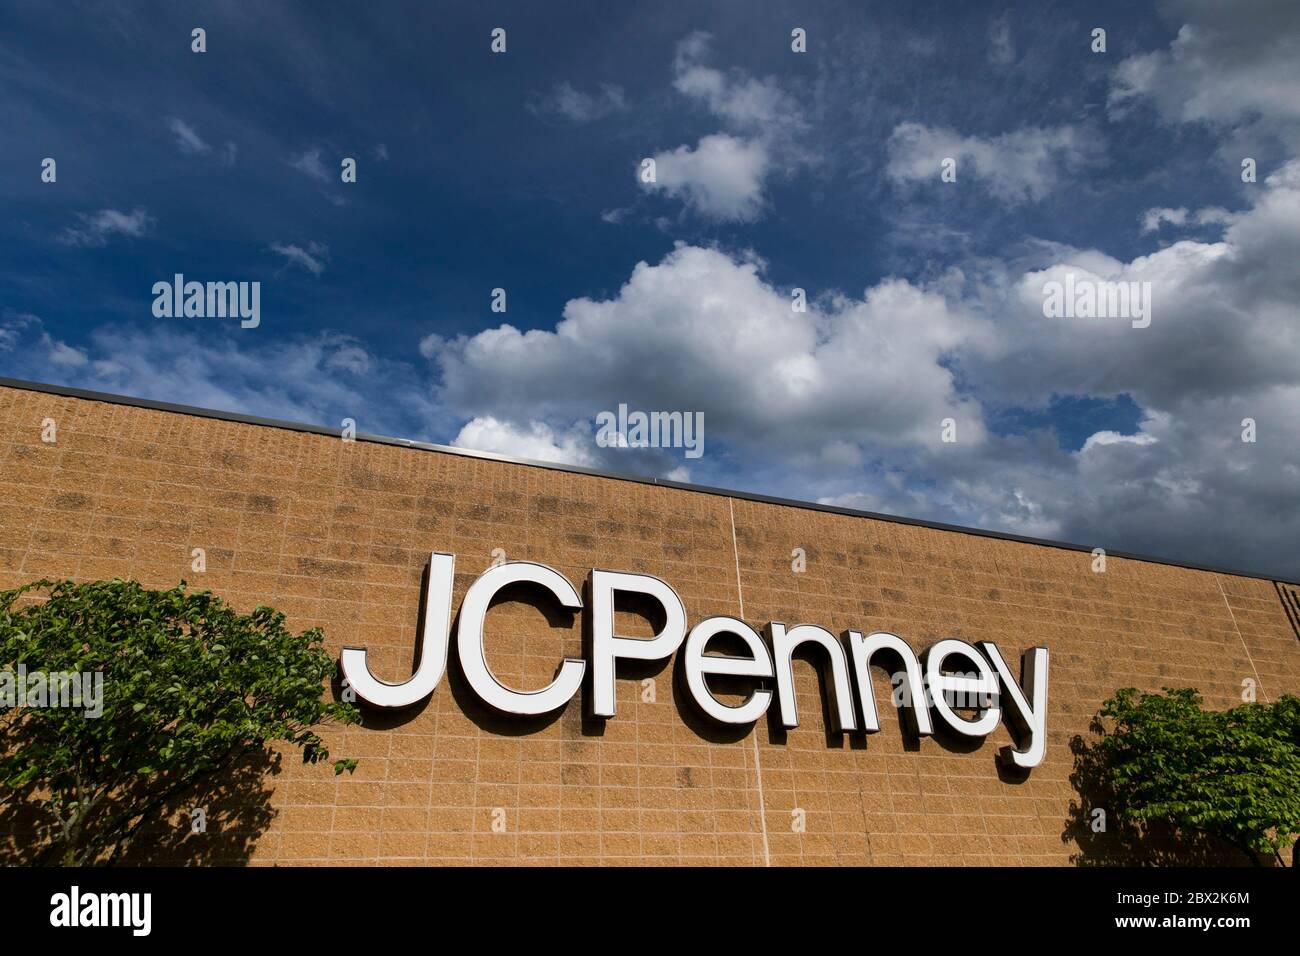 A logo sign outside of a JCPenney retail store location in Cumberland, Maryland on May 29, 2020. Stock Photo